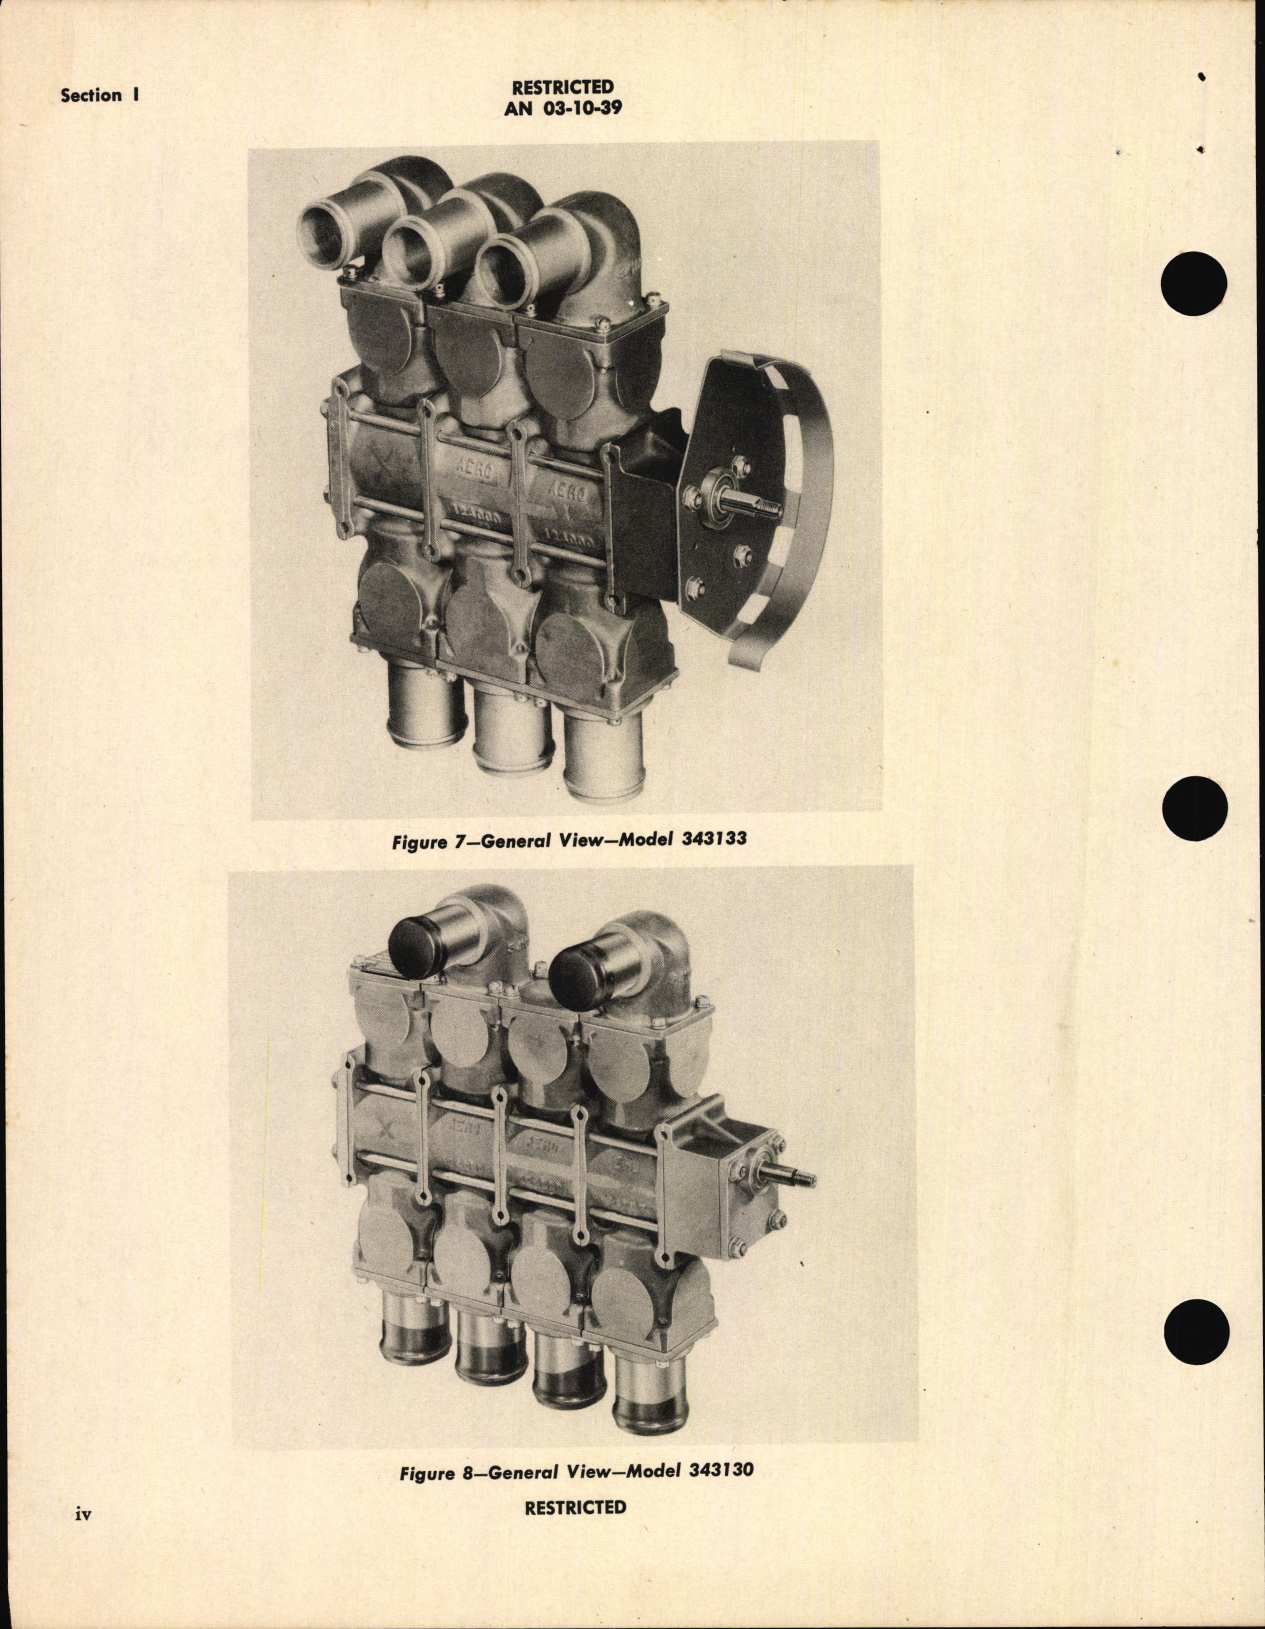 Sample page 6 from AirCorps Library document: Handbook of Instructions with Parts Catalog for Fuel Selector Valves